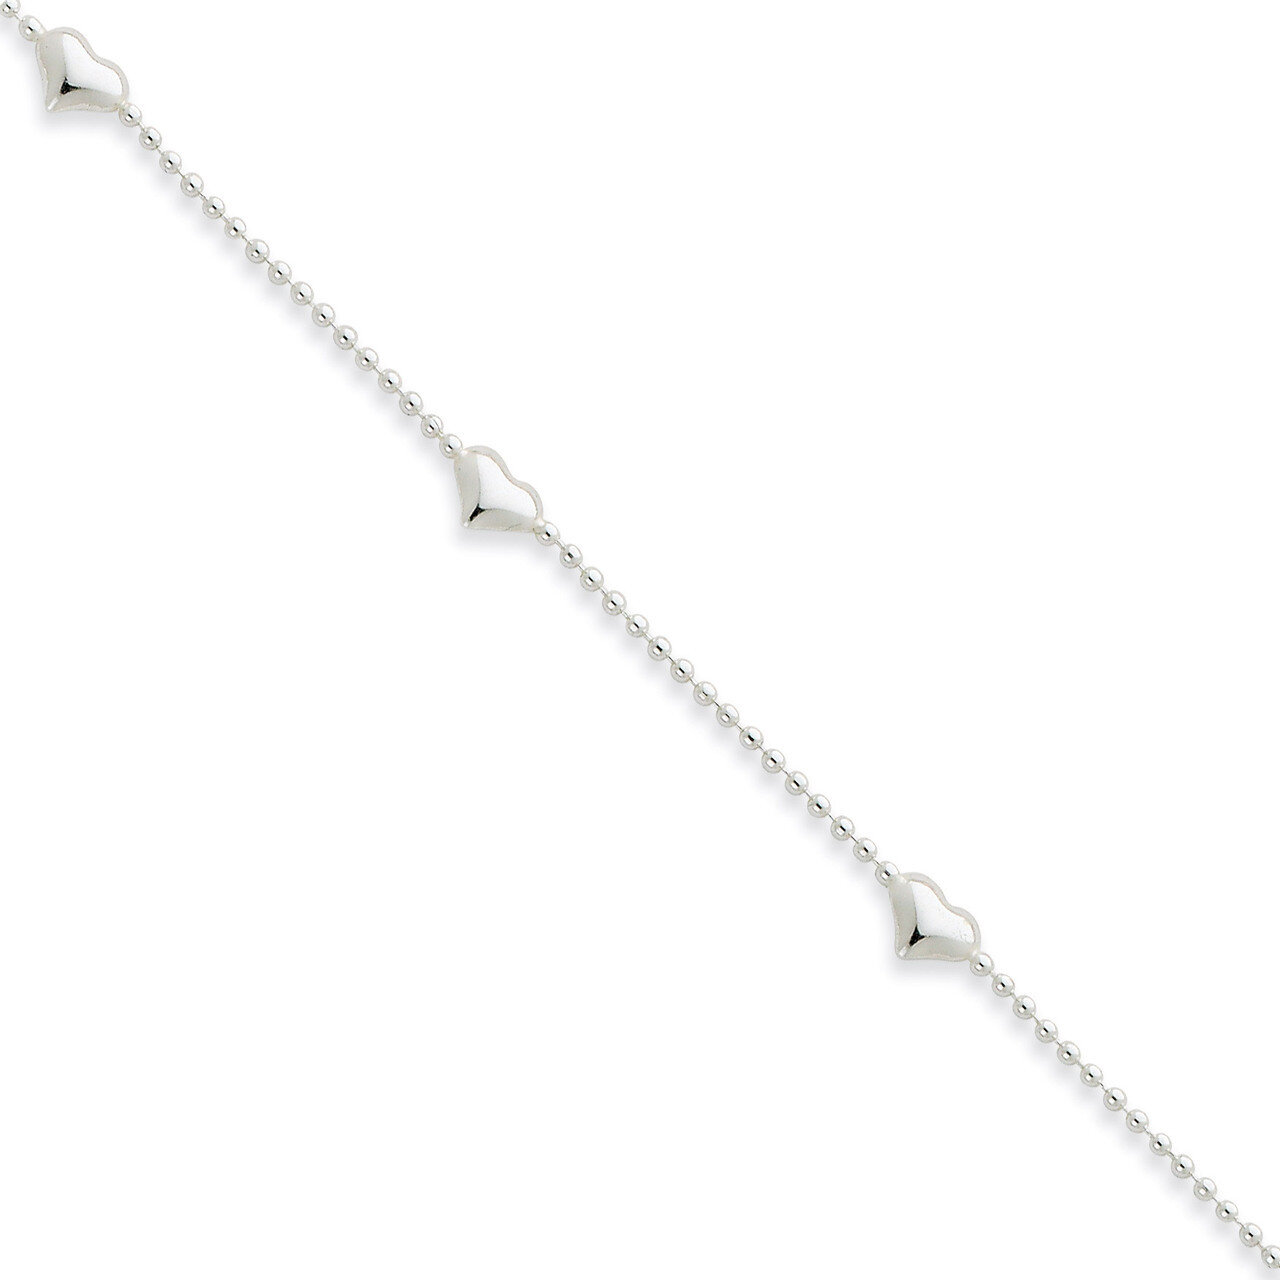 10 Inch Dangling Heart Anklet Sterling Silver QG1435-10